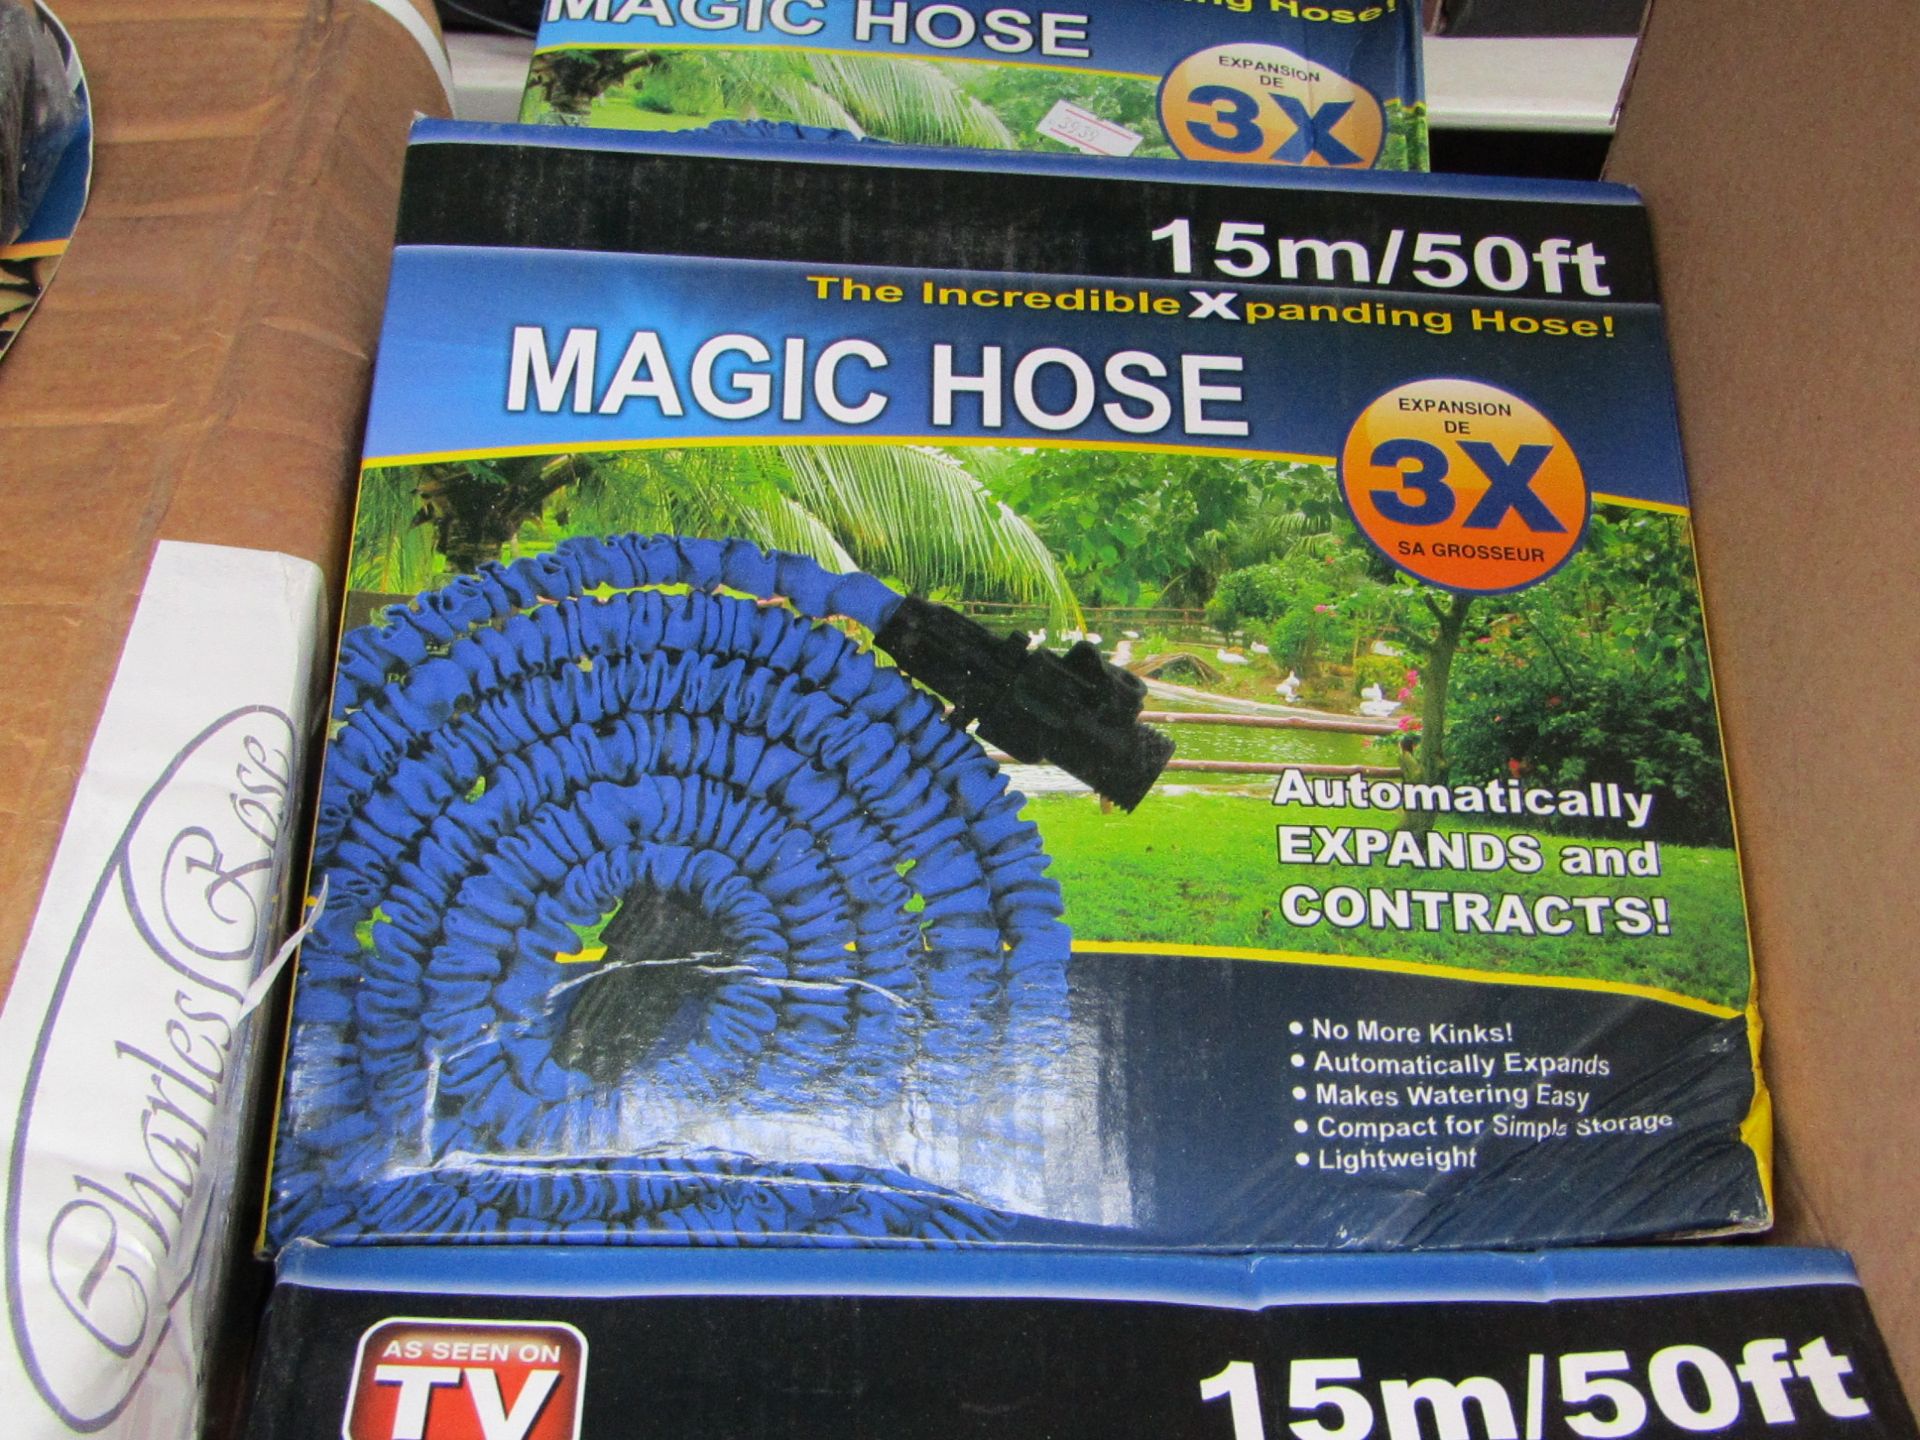 Magic Hose expanding hose up to 50ft, new and boxed.